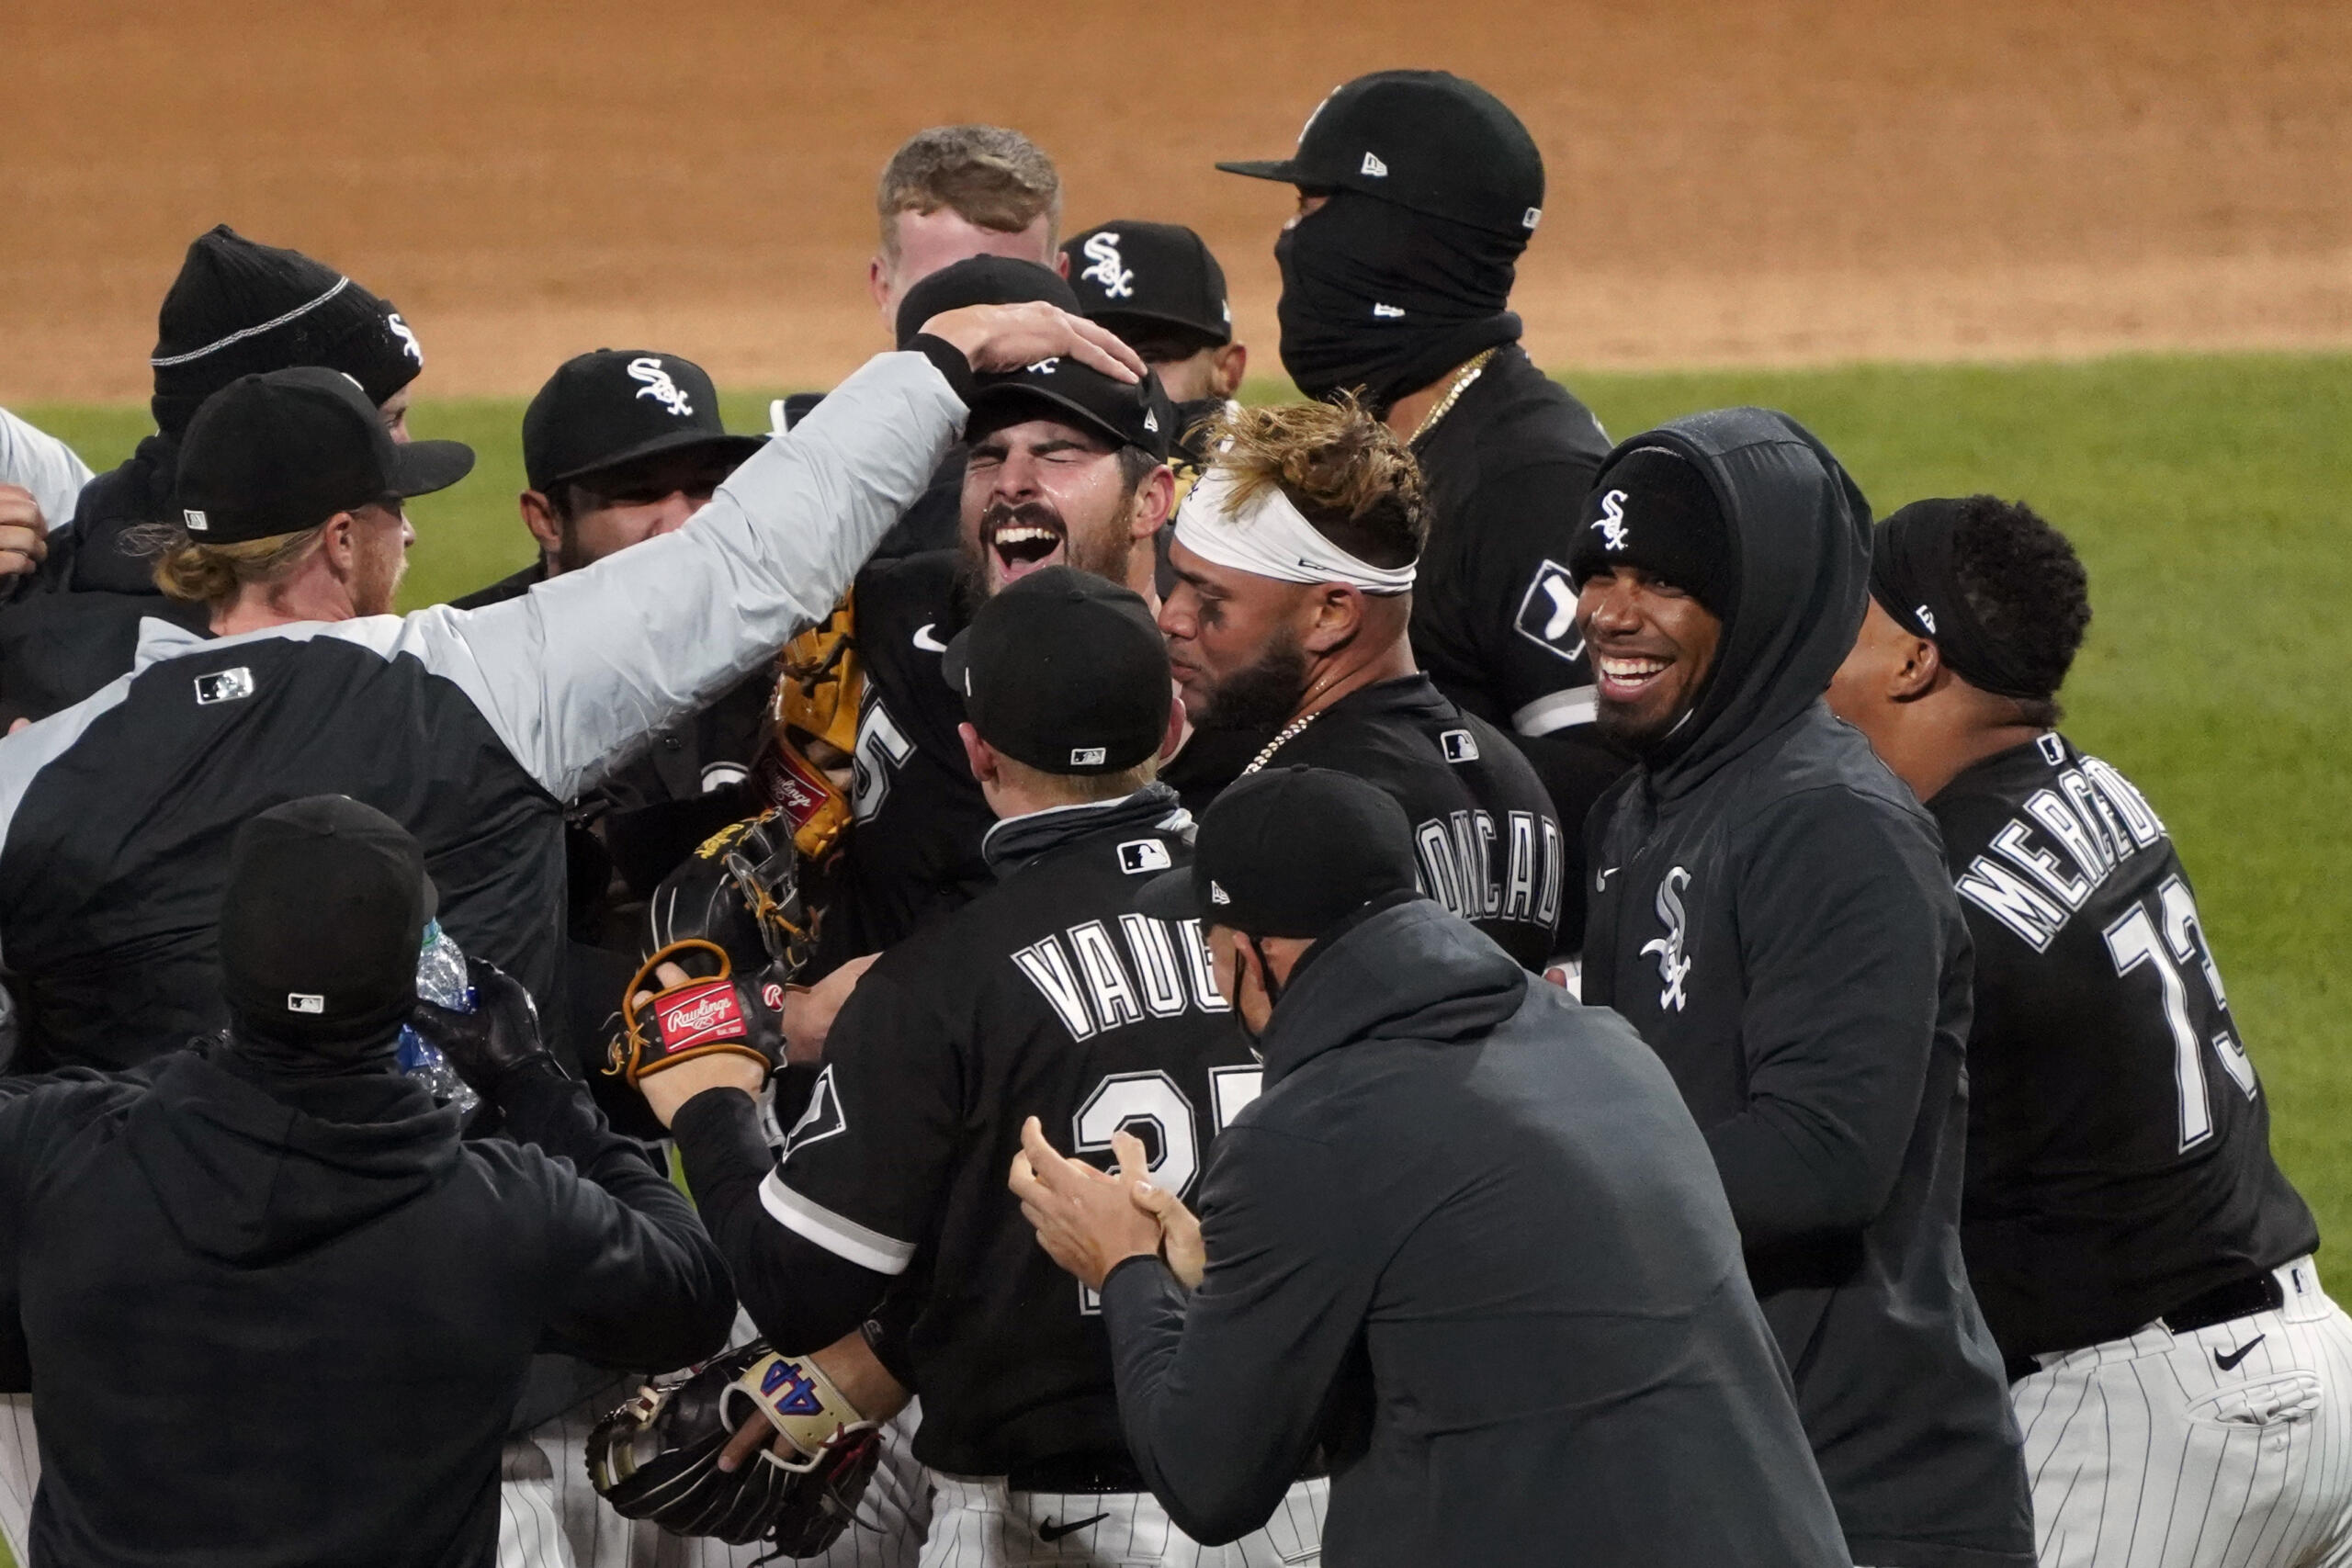 Chicago White Sox starting pitcher Carlos Rodon, center, celebrates his no hitter against the Cleveland Indians with his teammates in a baseball game, Wednesday, April, 14, 2021, in Chicago.